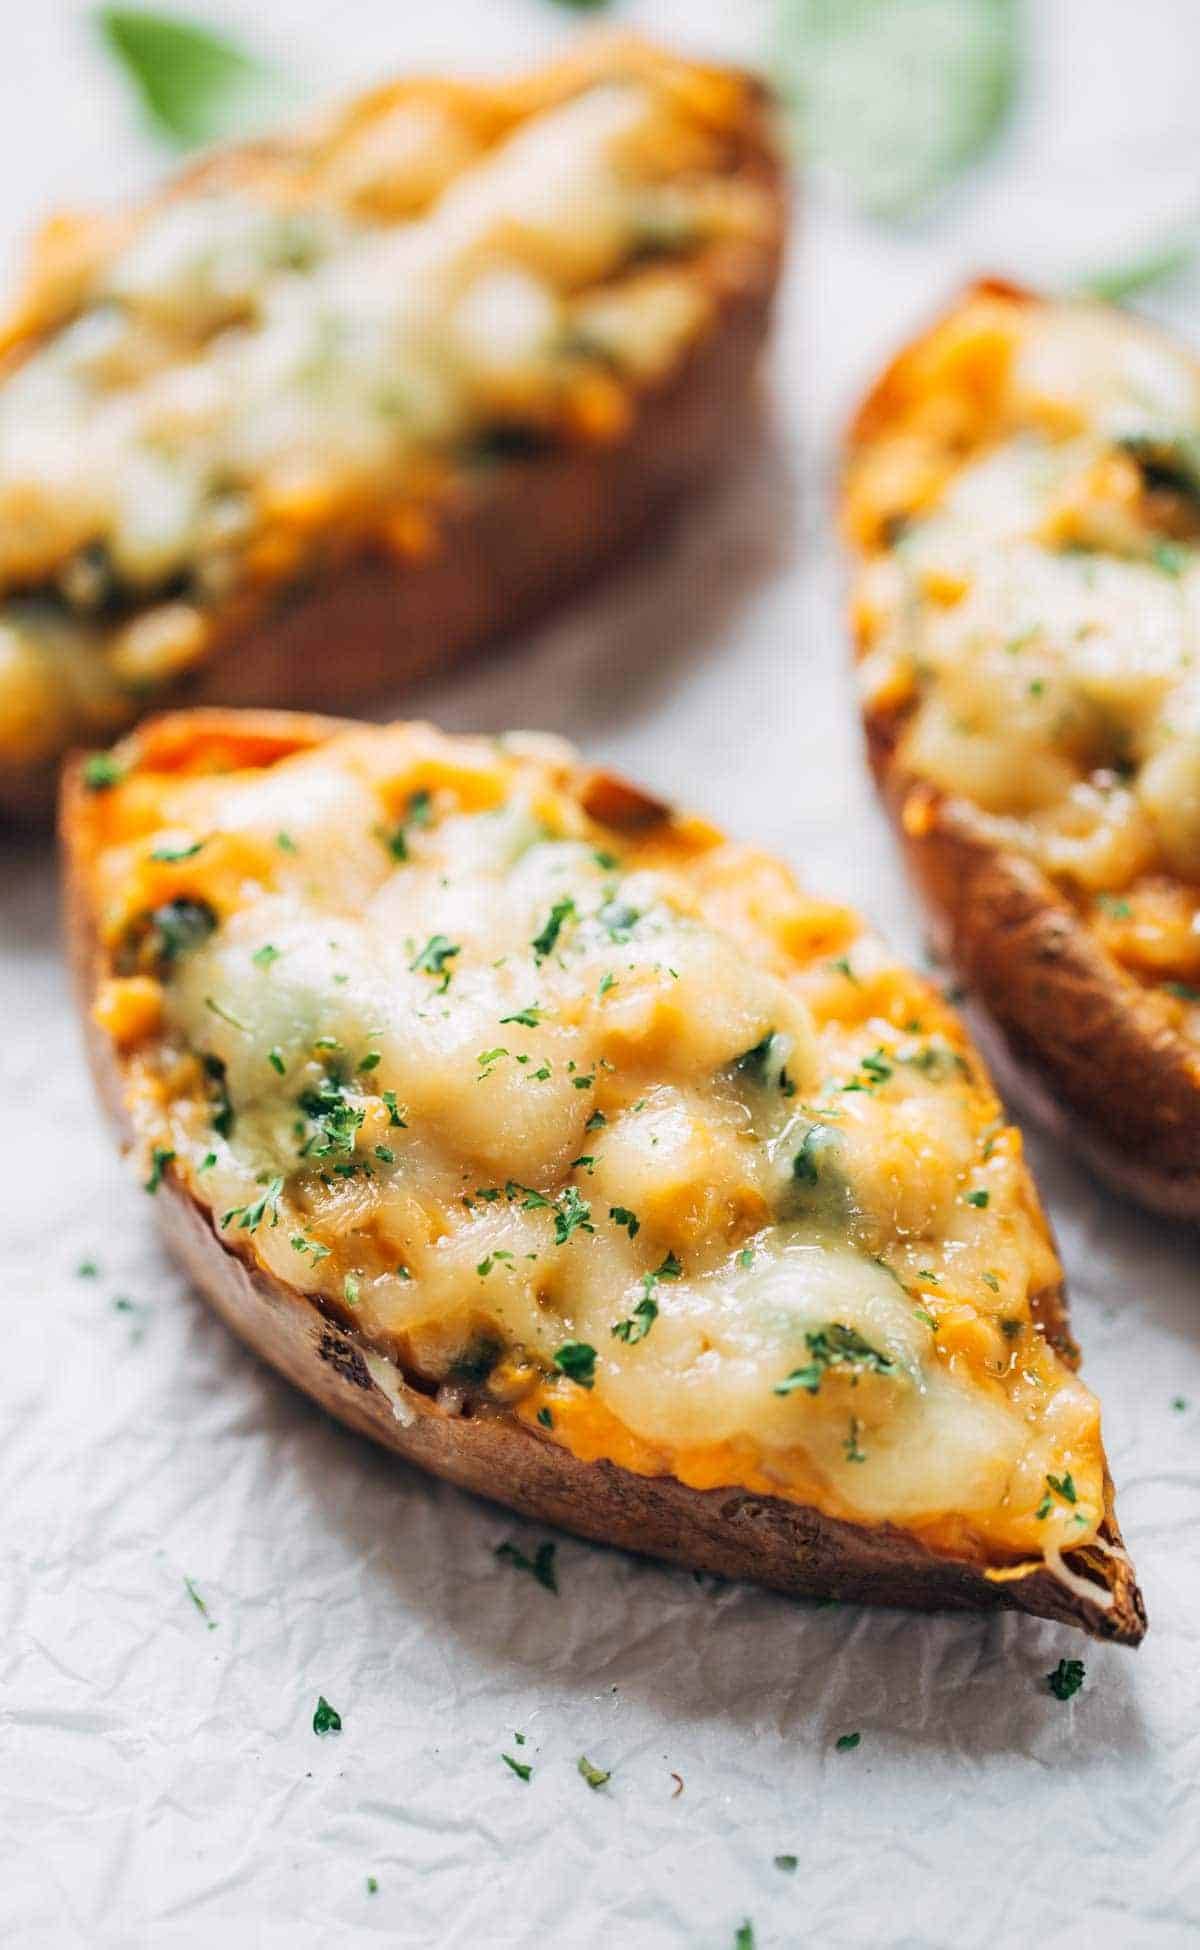 Healthy Sweet Potato Skins recipe: stuffed with a creamy spinach filling and covered with melted cheese. A must-try for sweet potato lovers! | pinchofyum.com